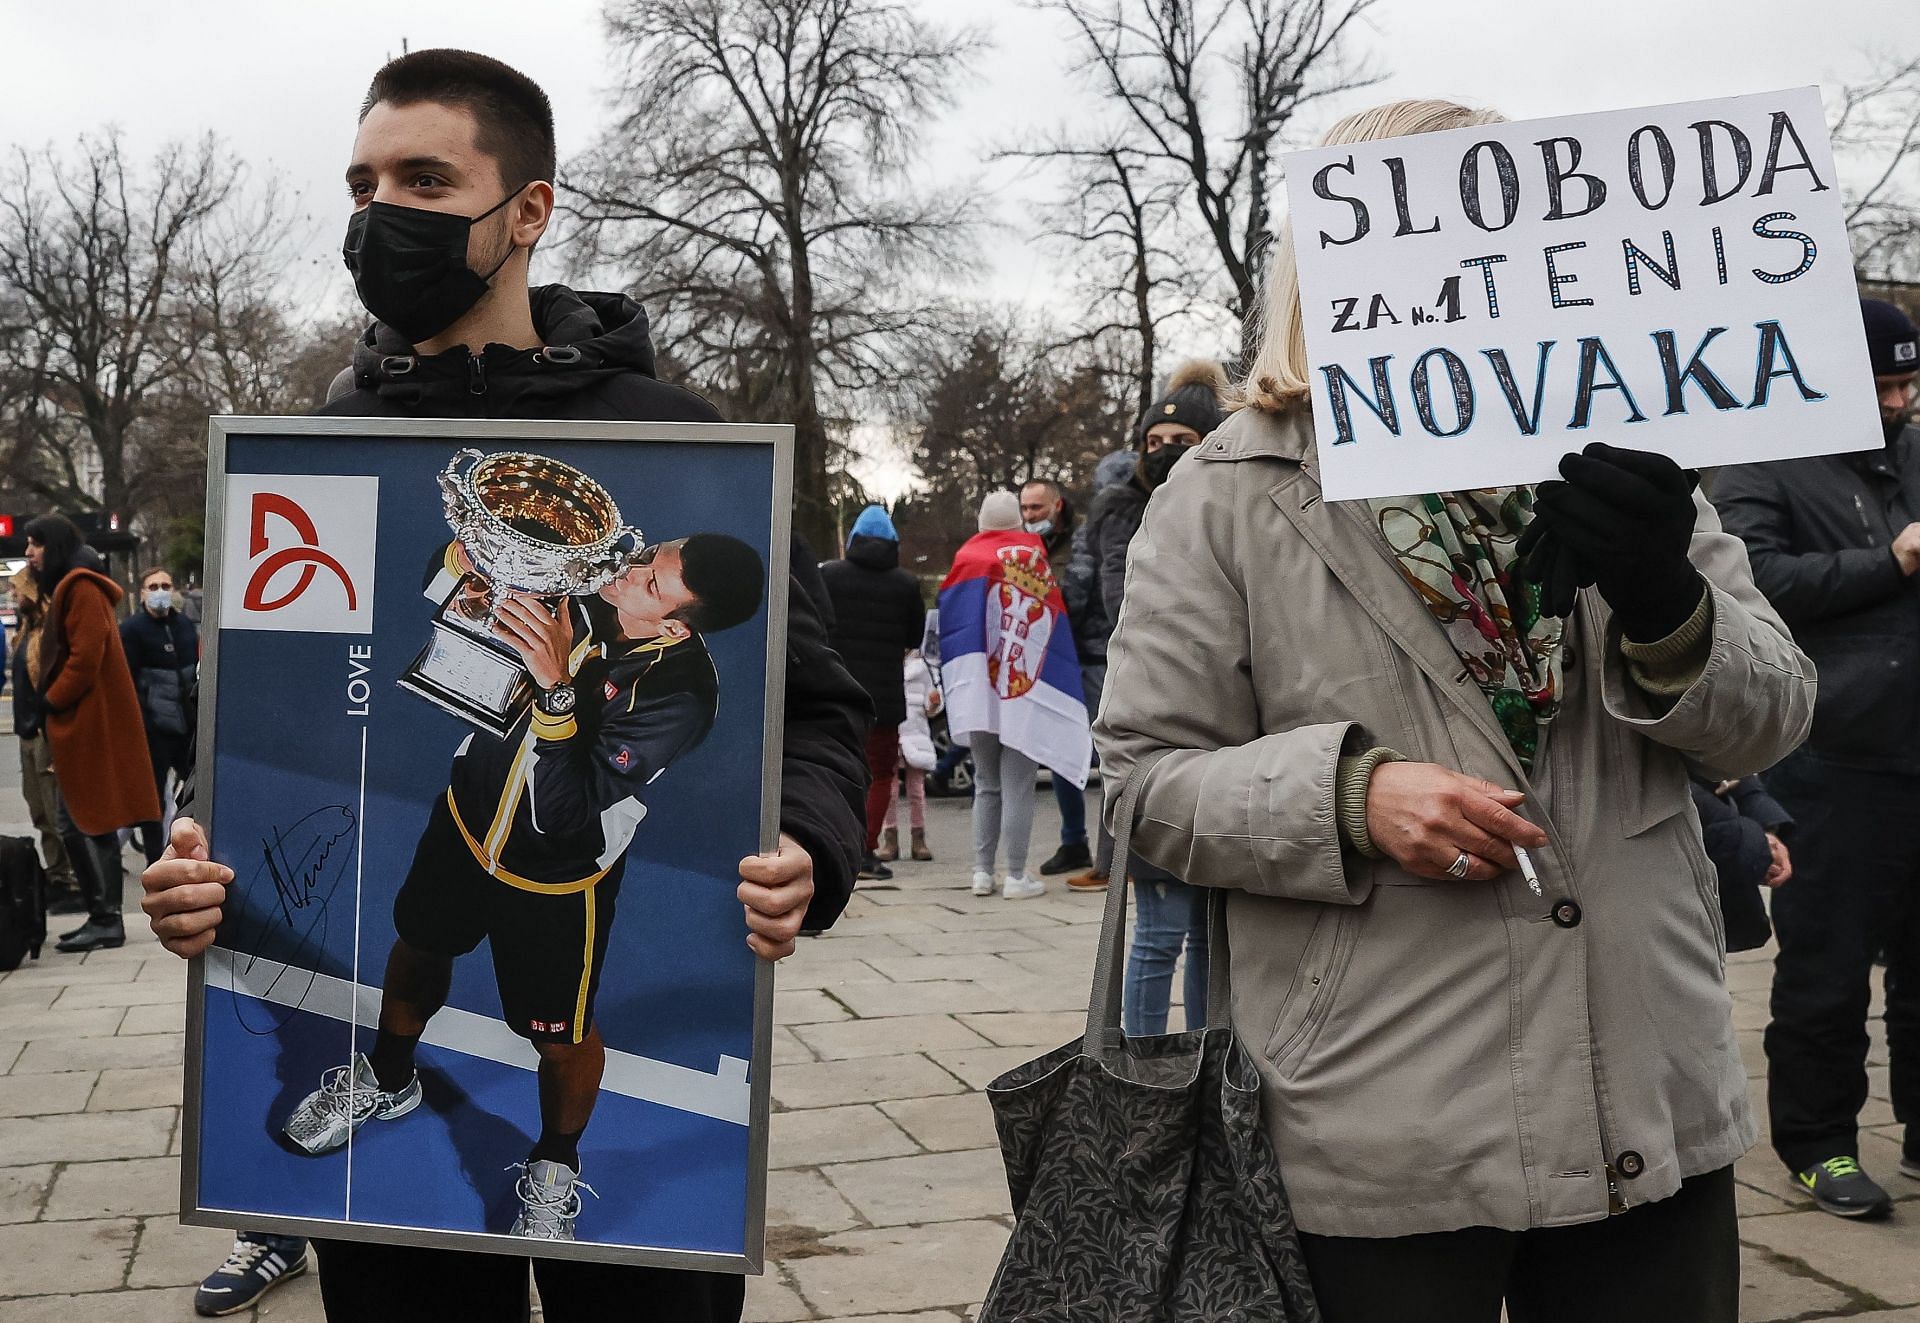 Demonstrators with placards in support of Djokovic